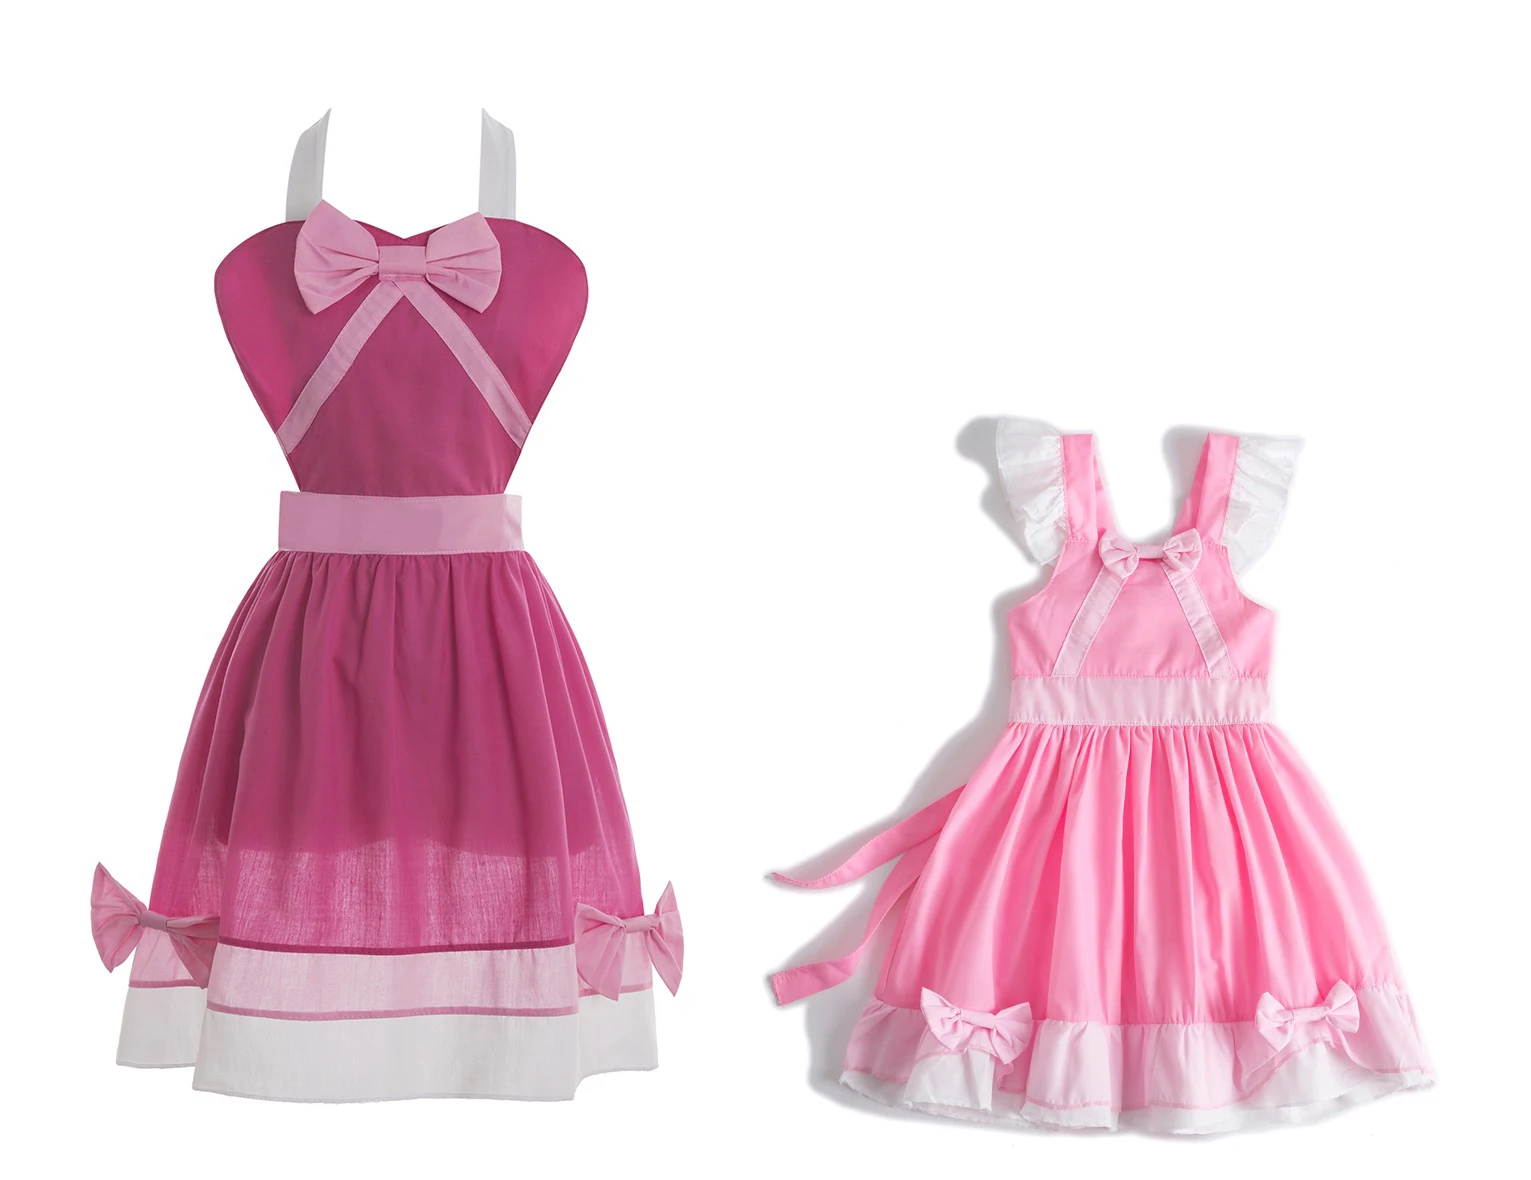 New Yado costume for toddler